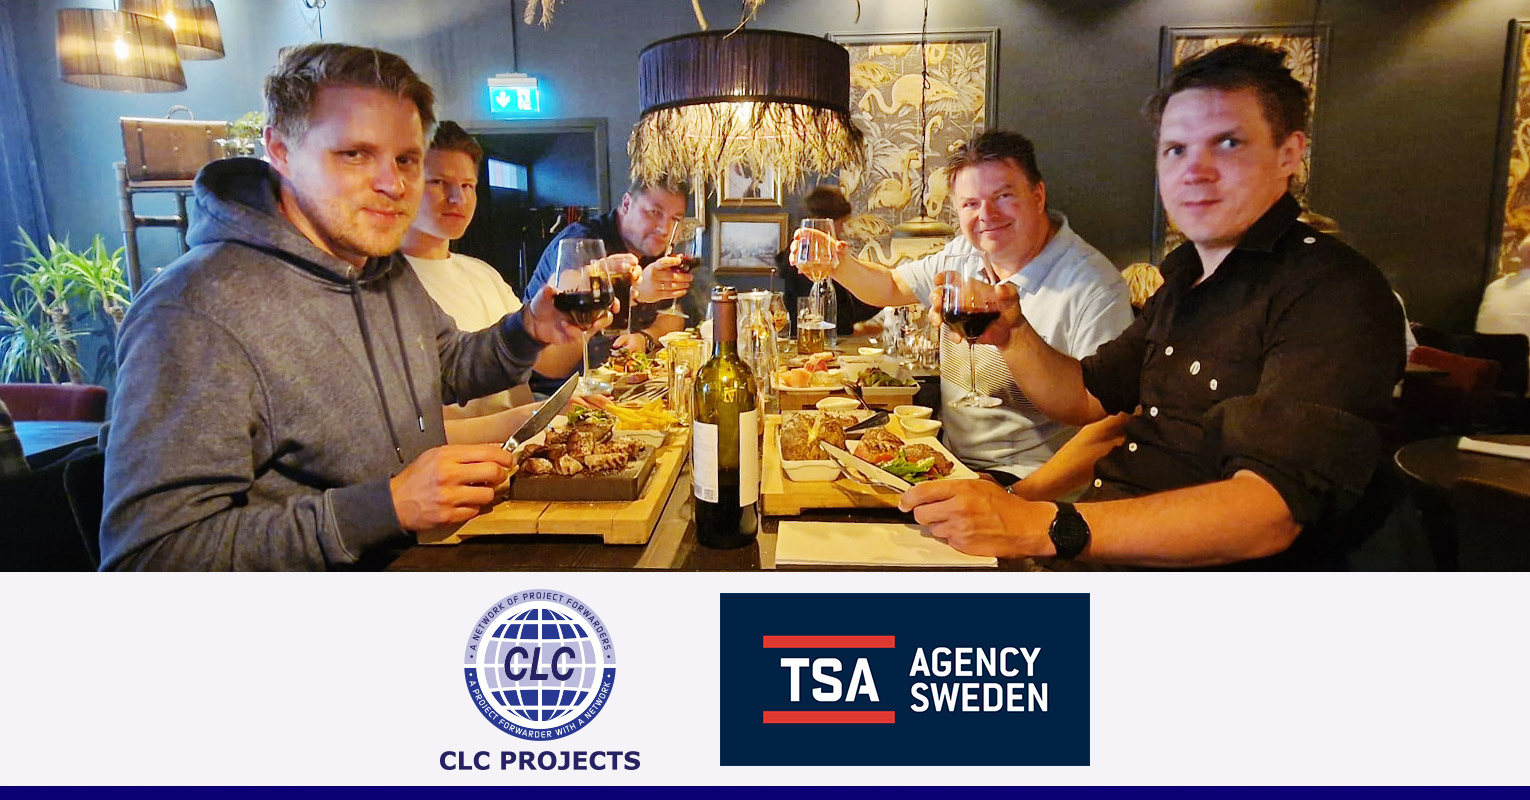 CLC Projects Chairman meeting with TSA Agency Sweden